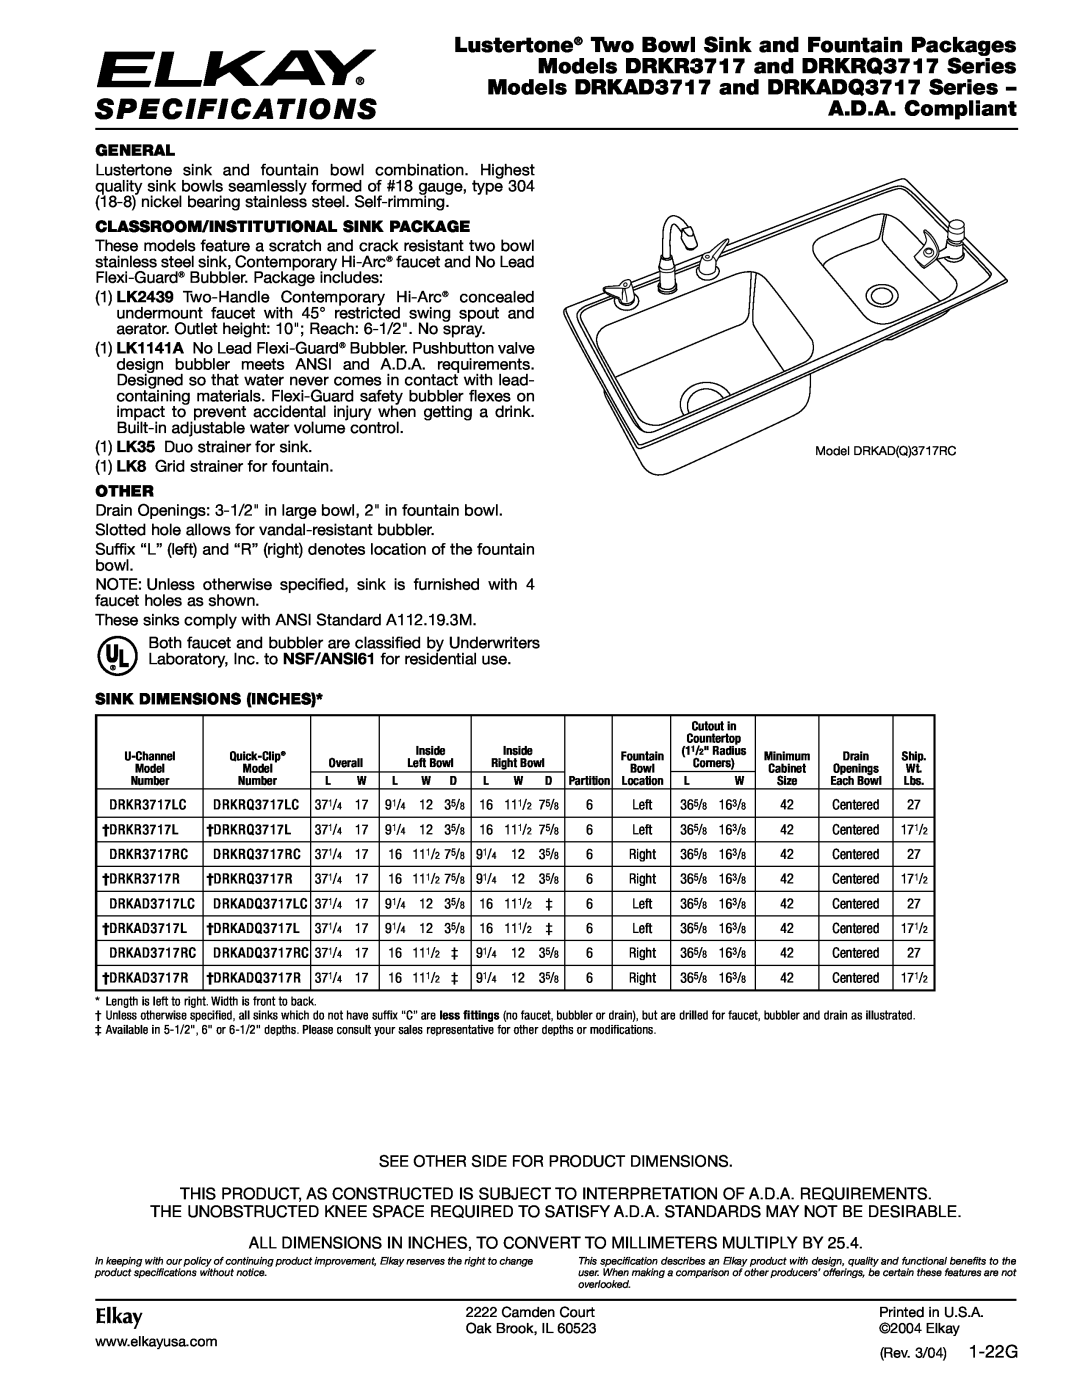 Elkay DRKR3717R specifications Specifications, Lustertone Two Bowl Sink and Fountain Packages, A.D.A. Compliant, Elkay 